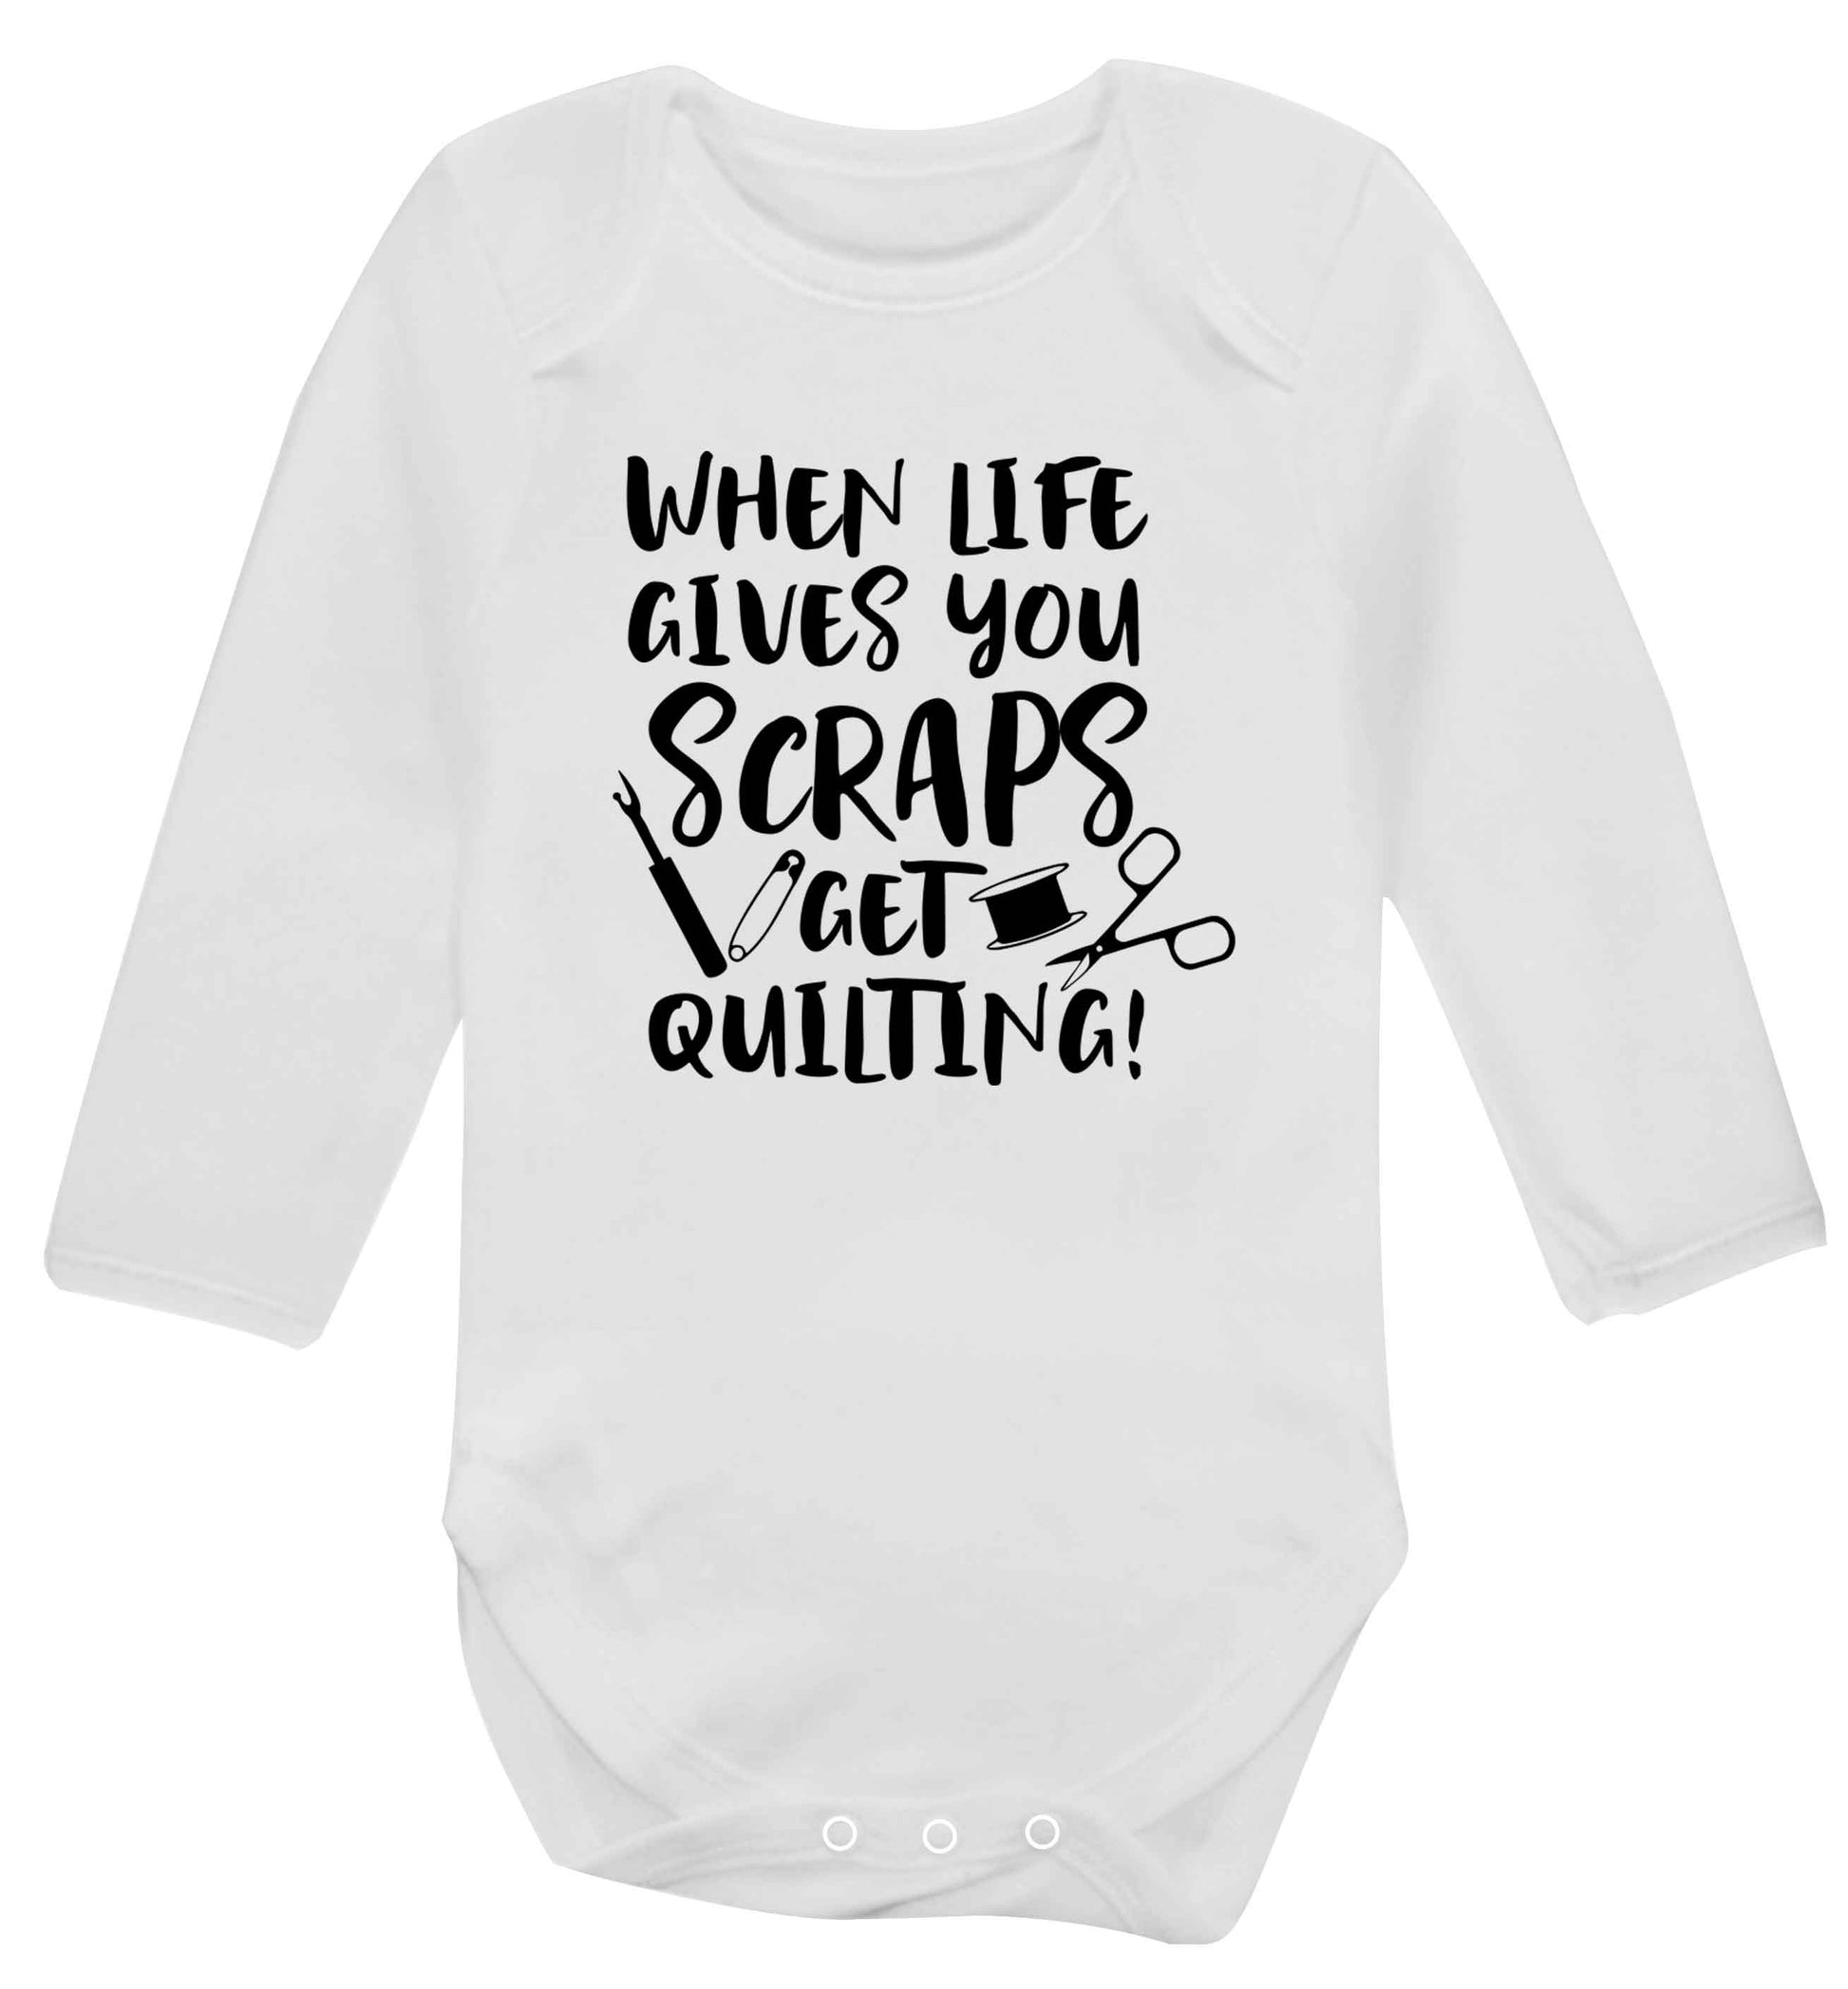 When life gives you scraps get quilting! Baby Vest long sleeved white 6-12 months